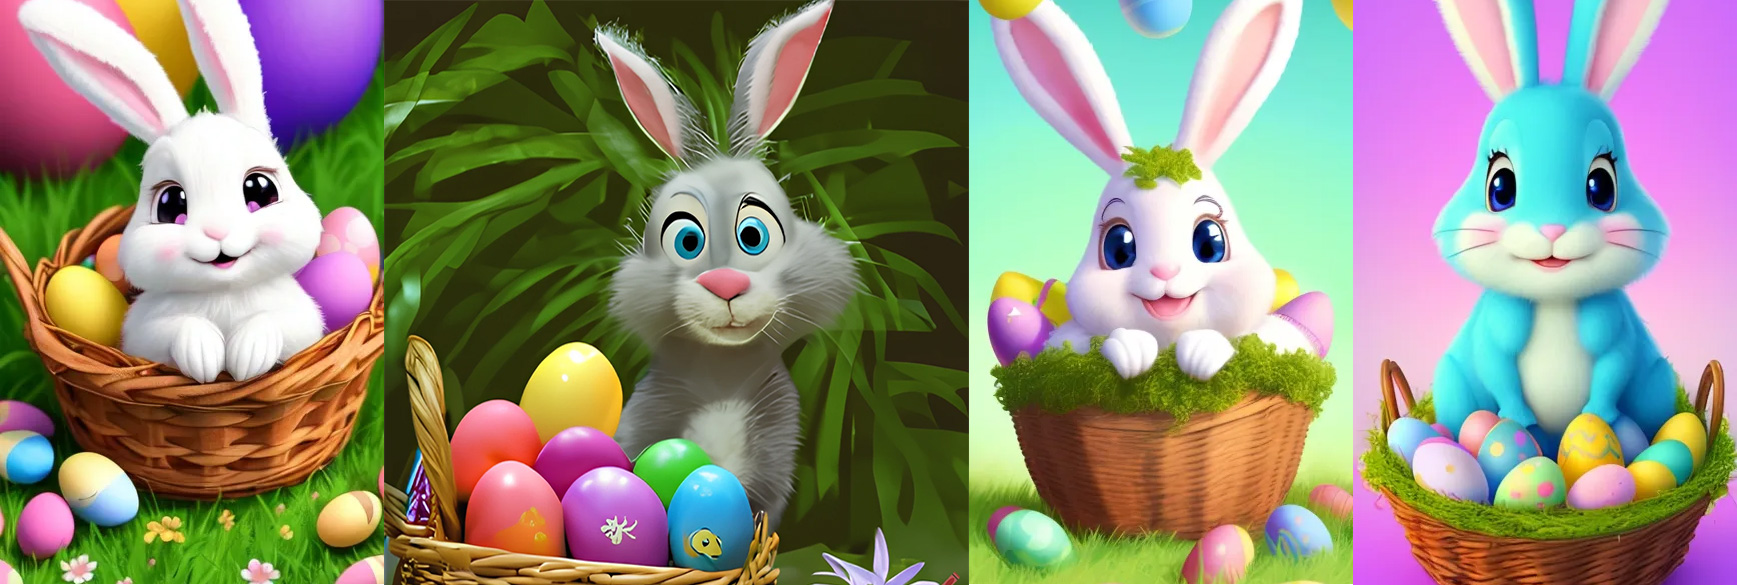 AI for fun: Generating Easter 🐰 Greeting Cards with Stable Diffusion and AI